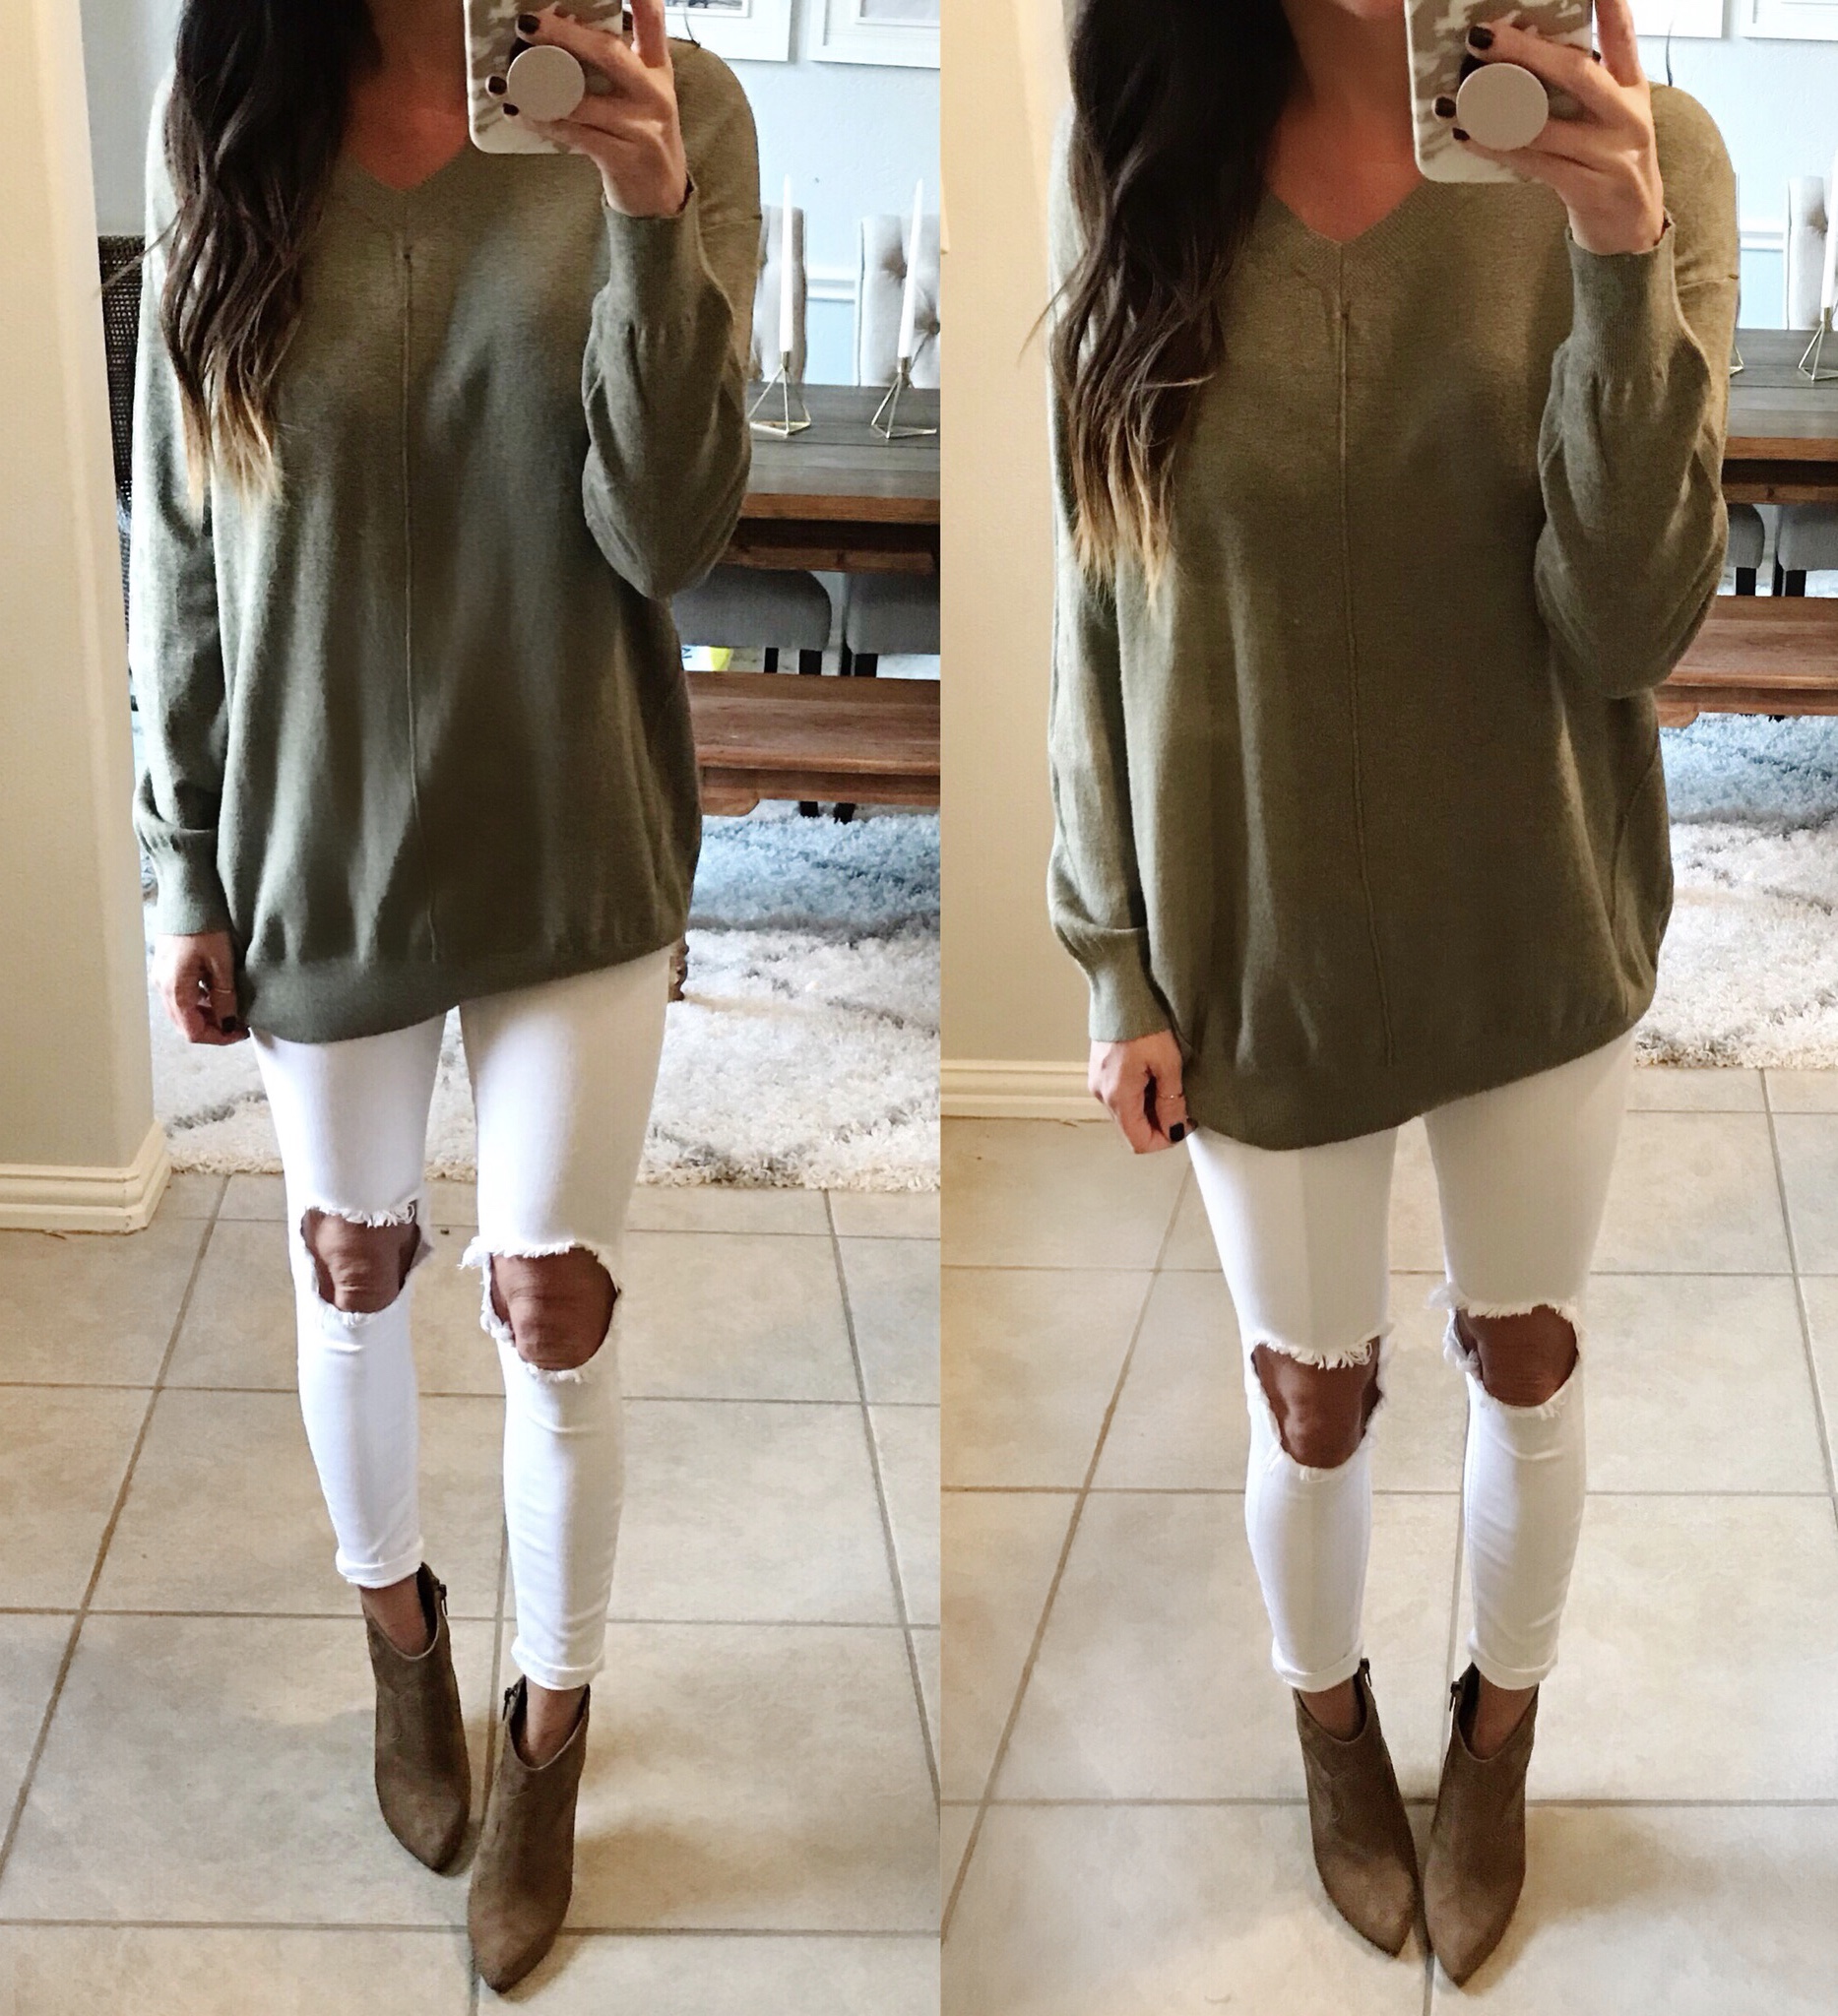 Jeans, sweater, booties